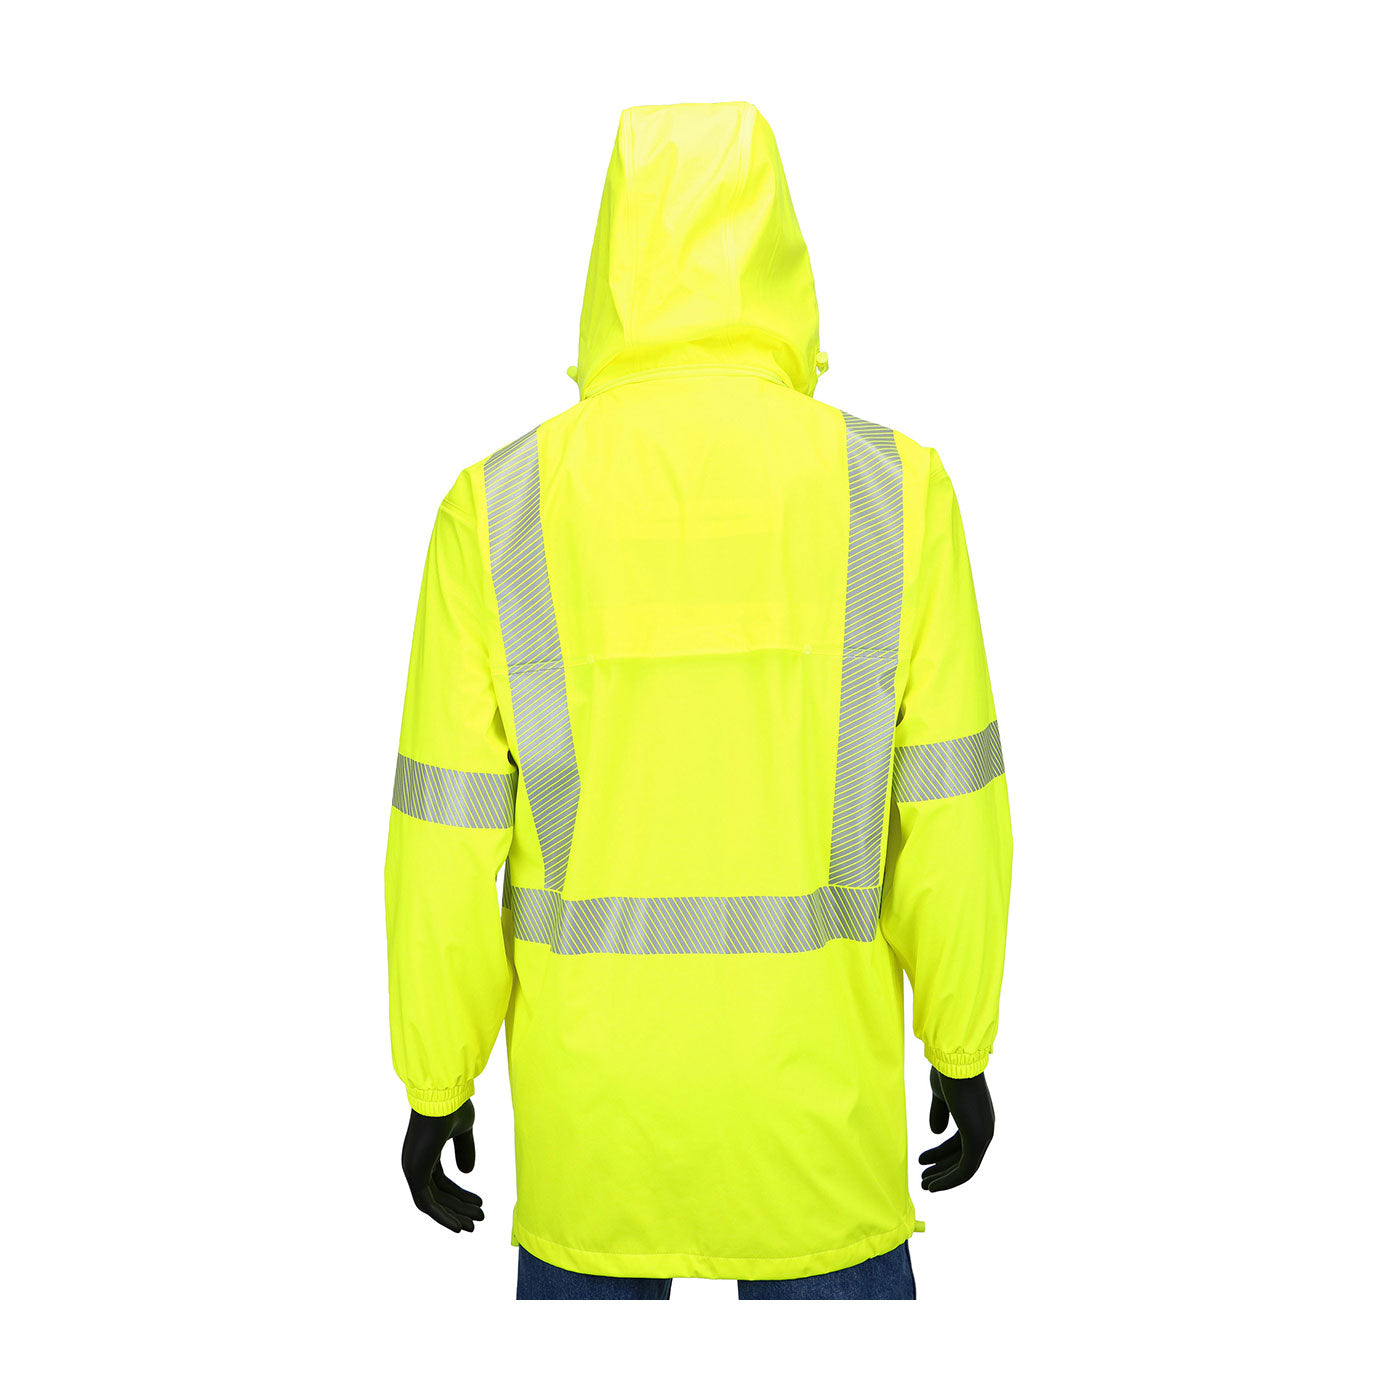 West Chester 4541J/4XL Type R Class 3 Waterproof Breathable Rain Jacket